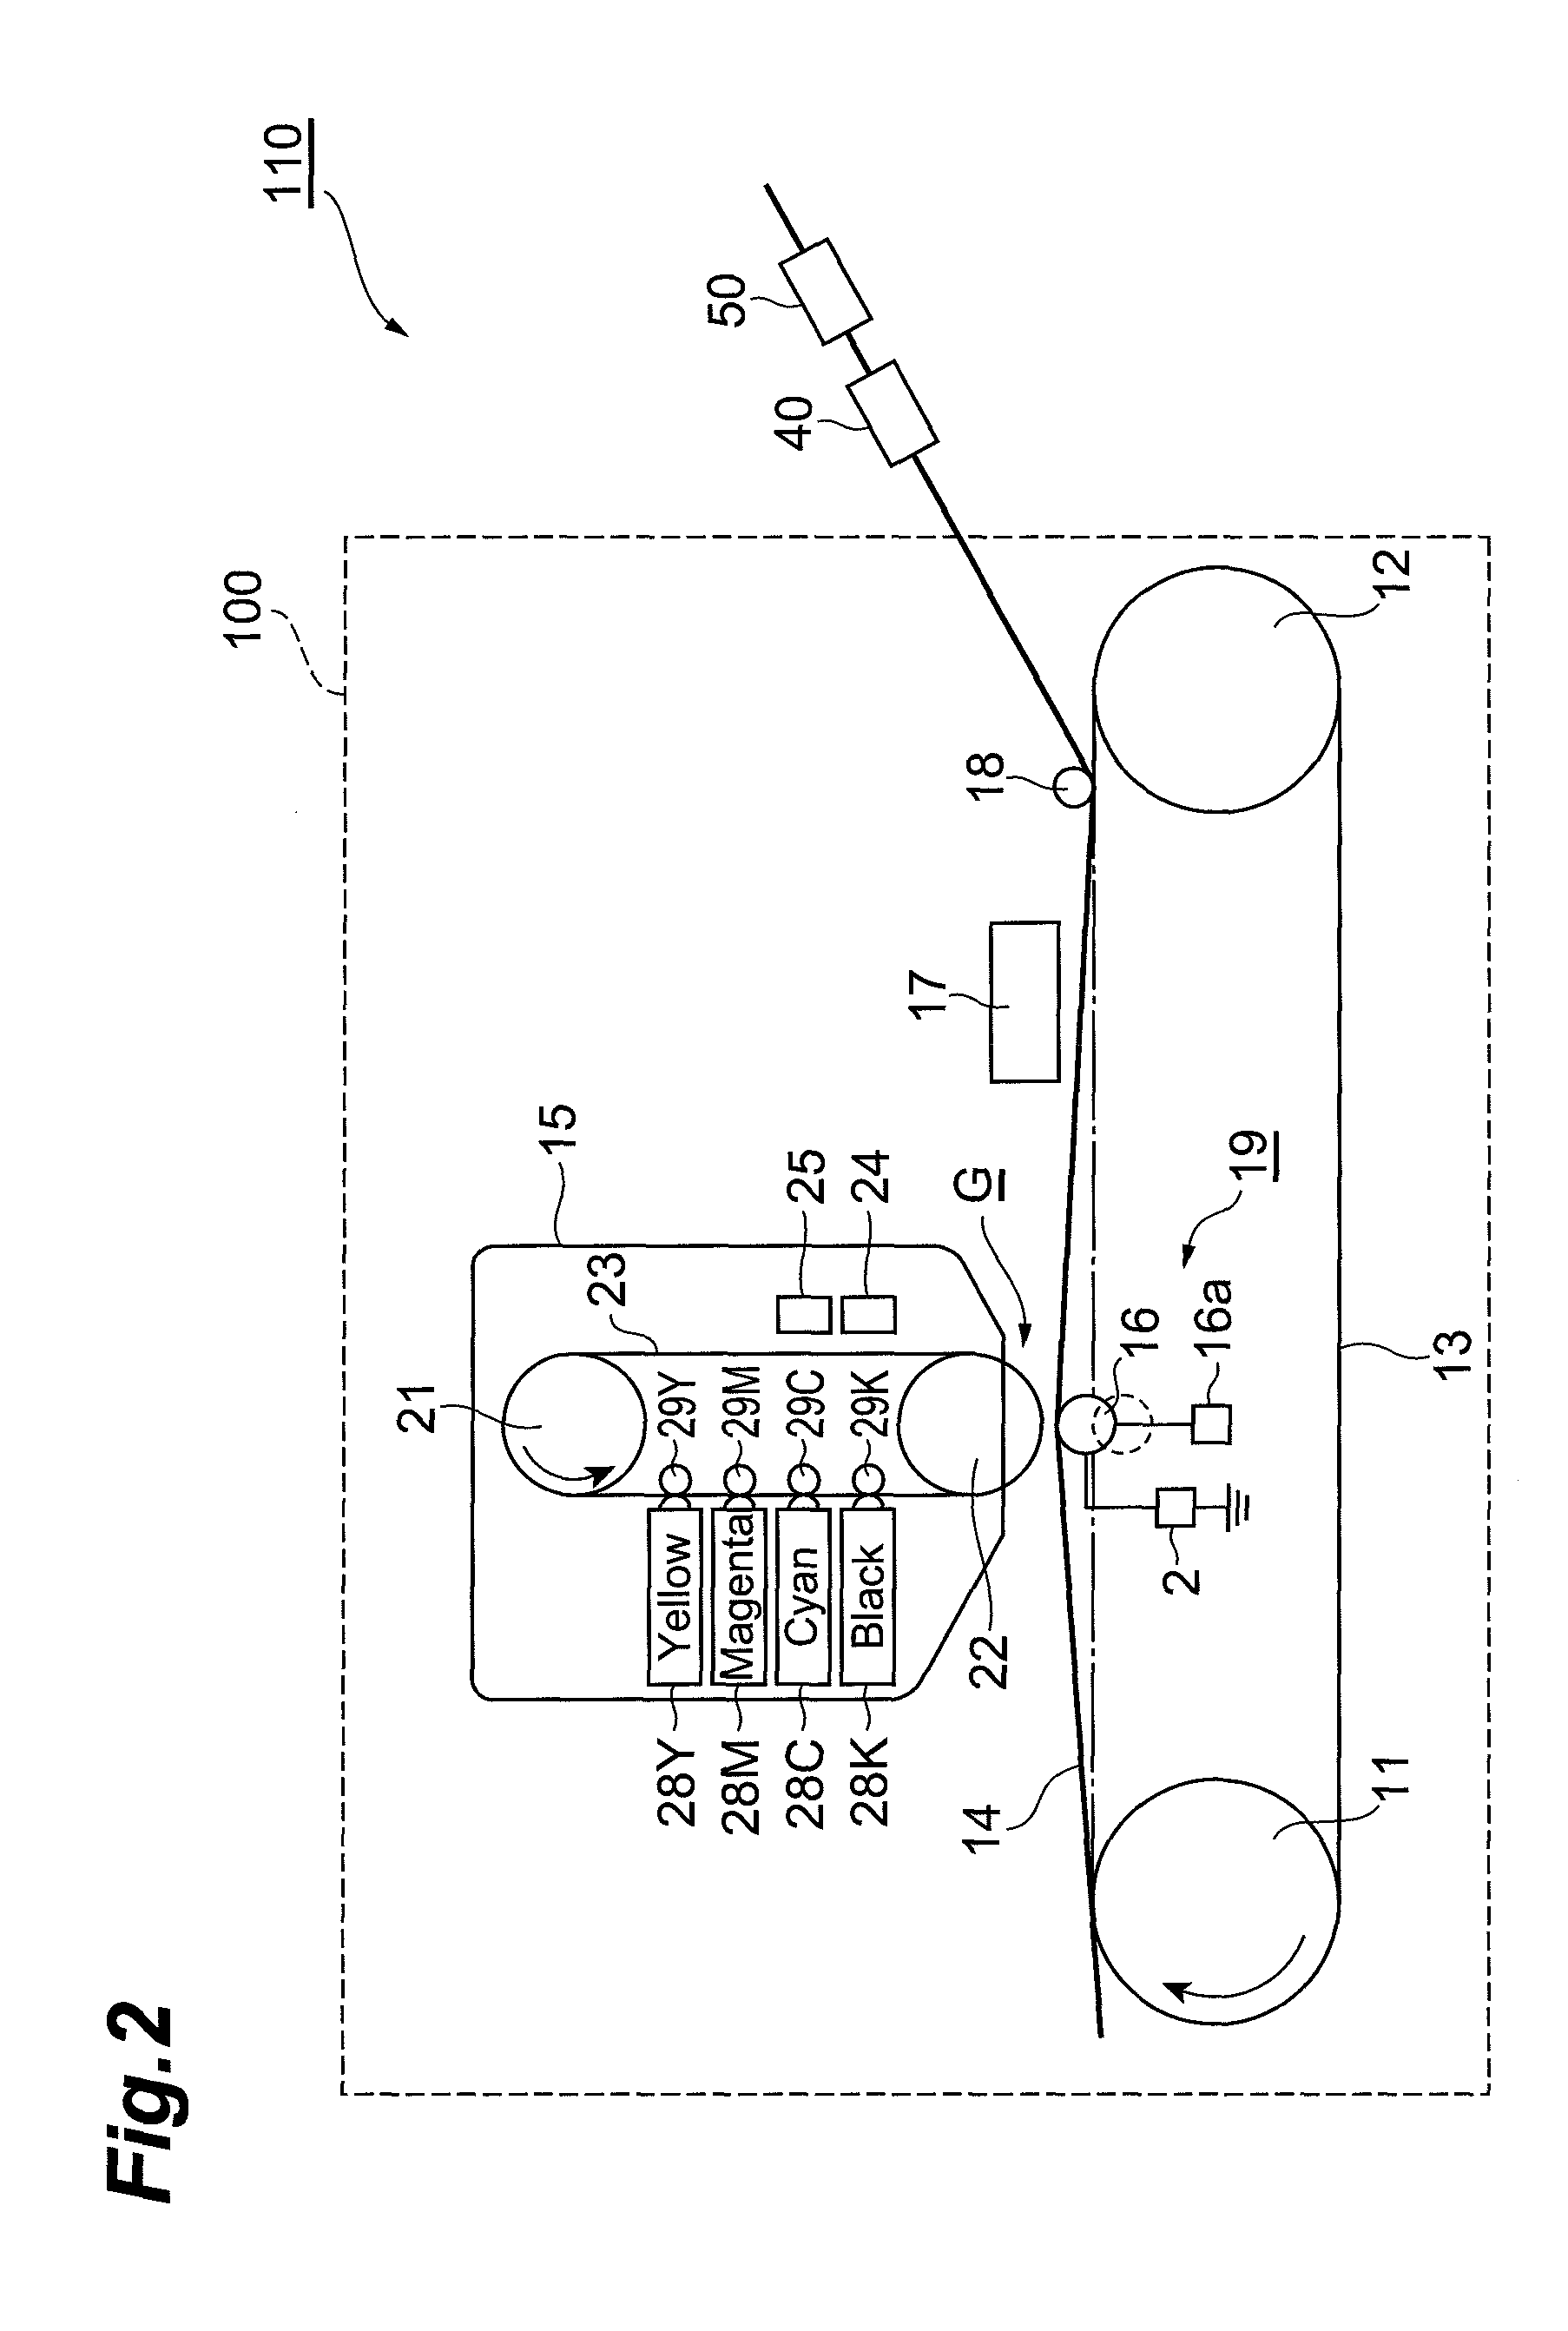 Apparatus and methods for electrostatically producing dye-printed material